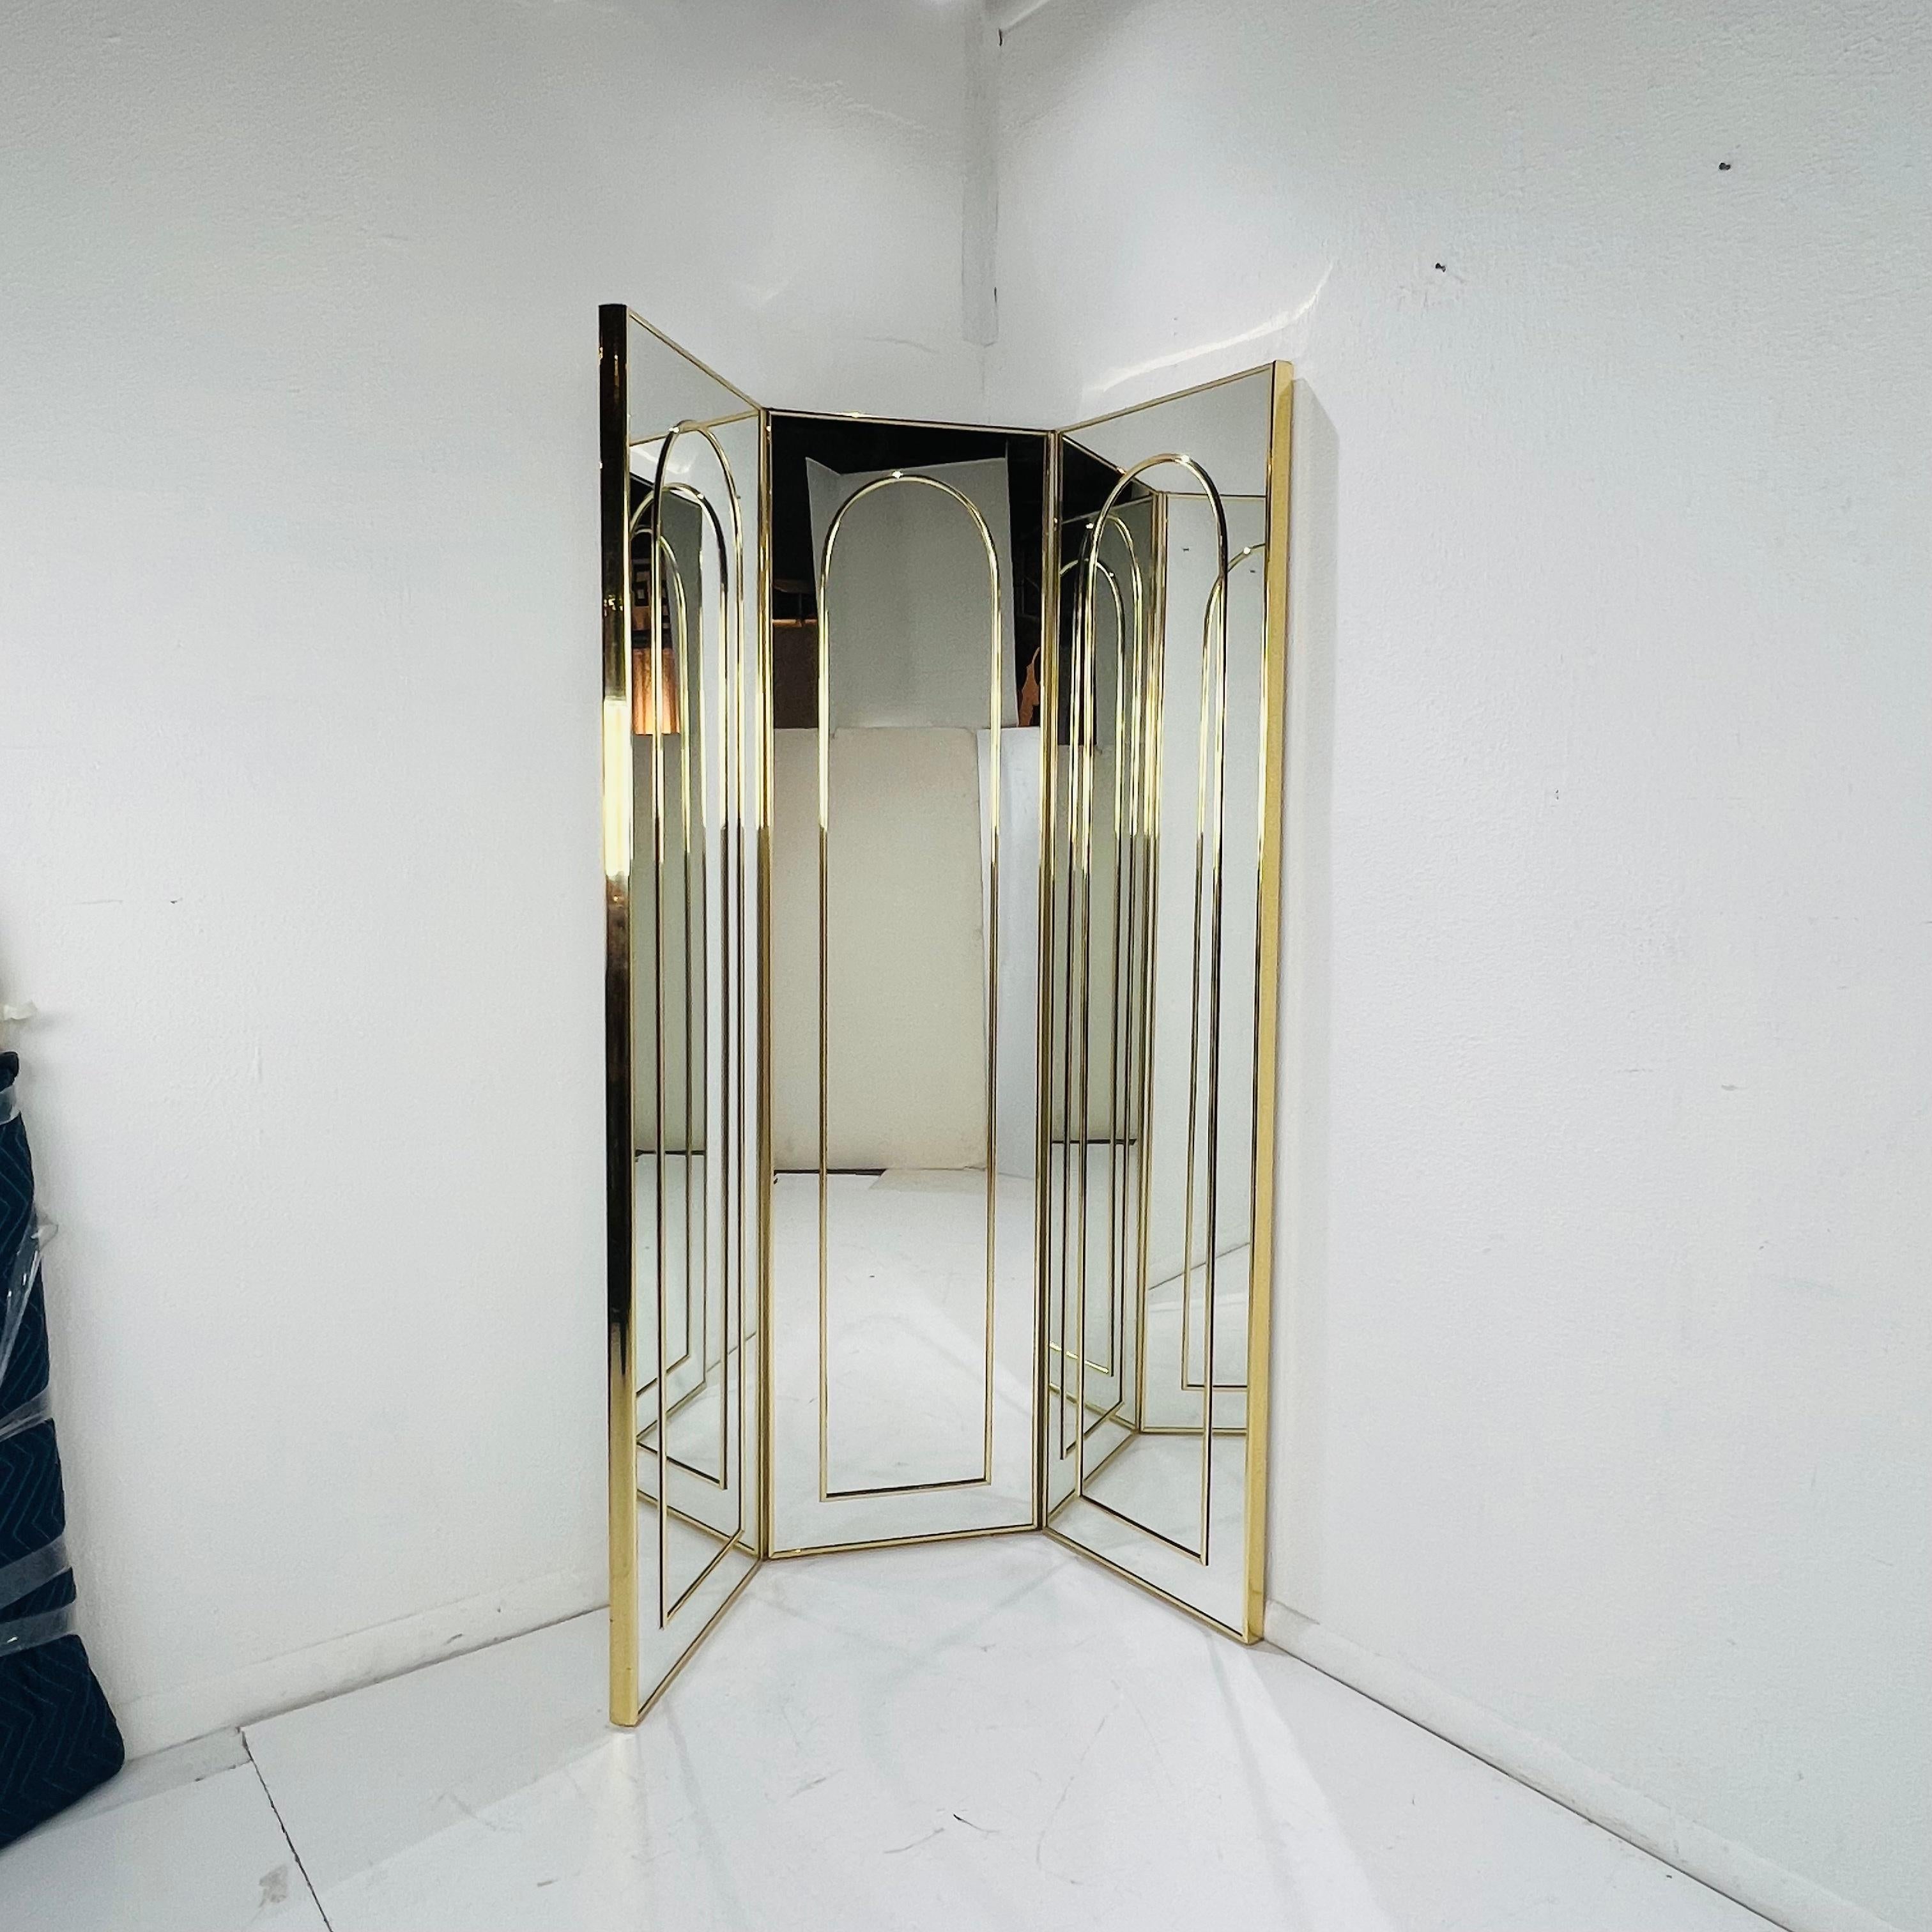 Mid century mirrored screen / room divider. The three panels are mirrored front and back, with the front side featuring brass arches. Panels meet at top and bottom hinges to stand independently. Minimal age-related wear, very good condition.